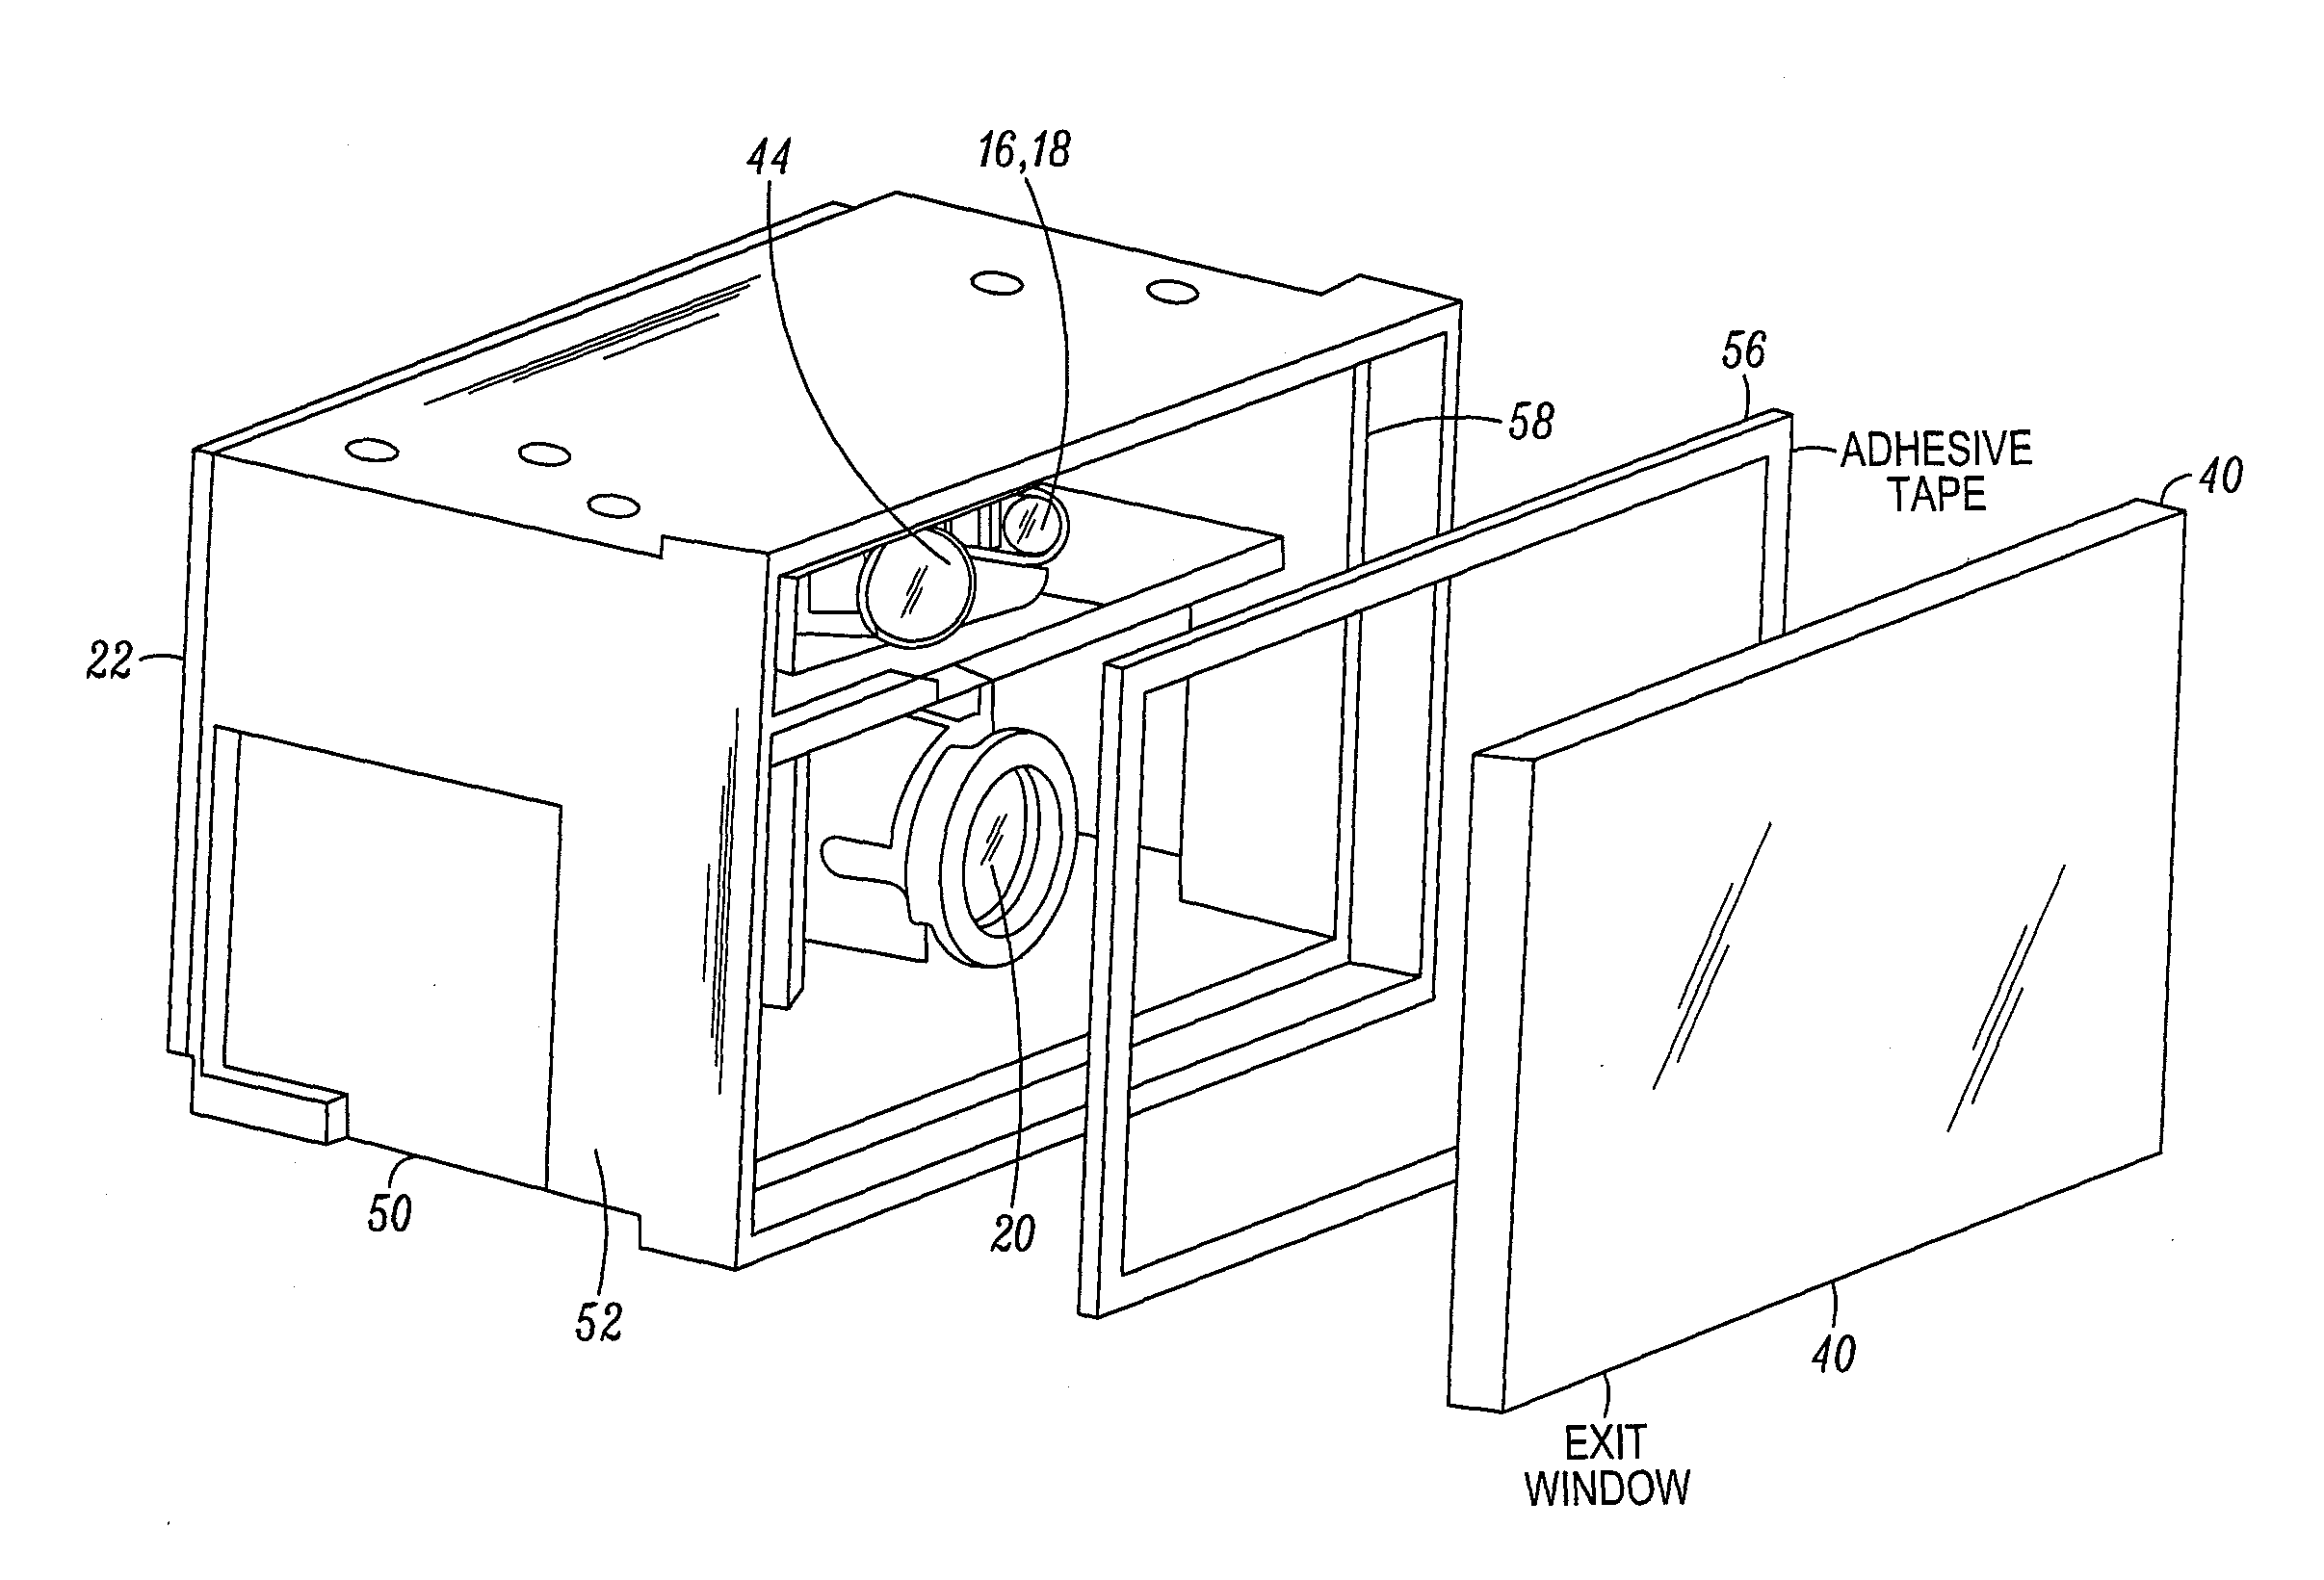 Shock-mounted imaging module with integrated window for resisting back reflections in an imaging reader